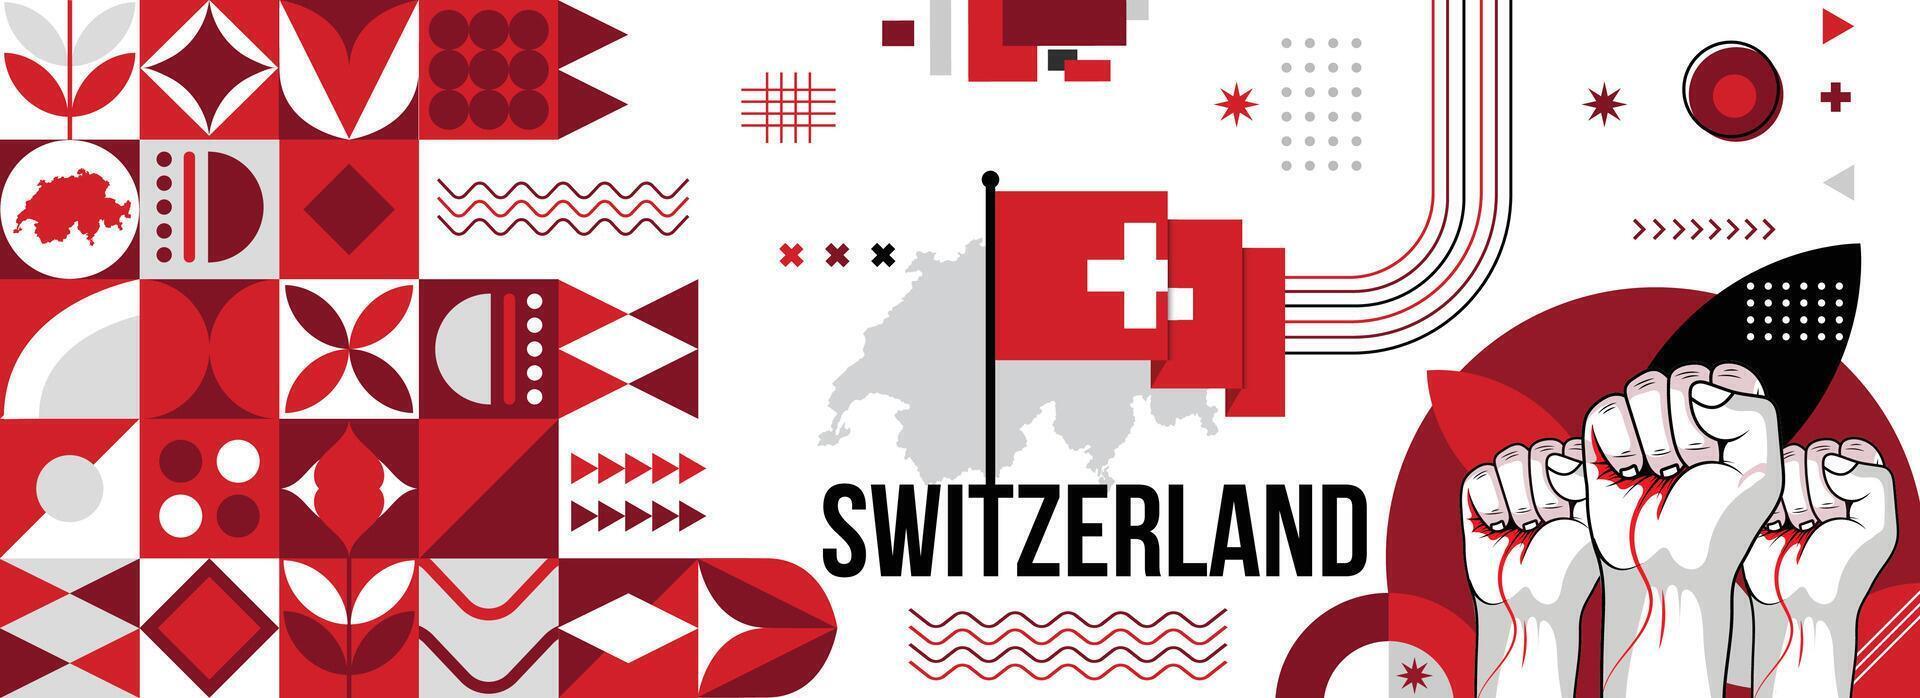 Switzerland national or independence day banner for country celebration. Flag and map of Switzerland with raised fists. Modern retro design with typorgaphy abstract geometric icons. vector